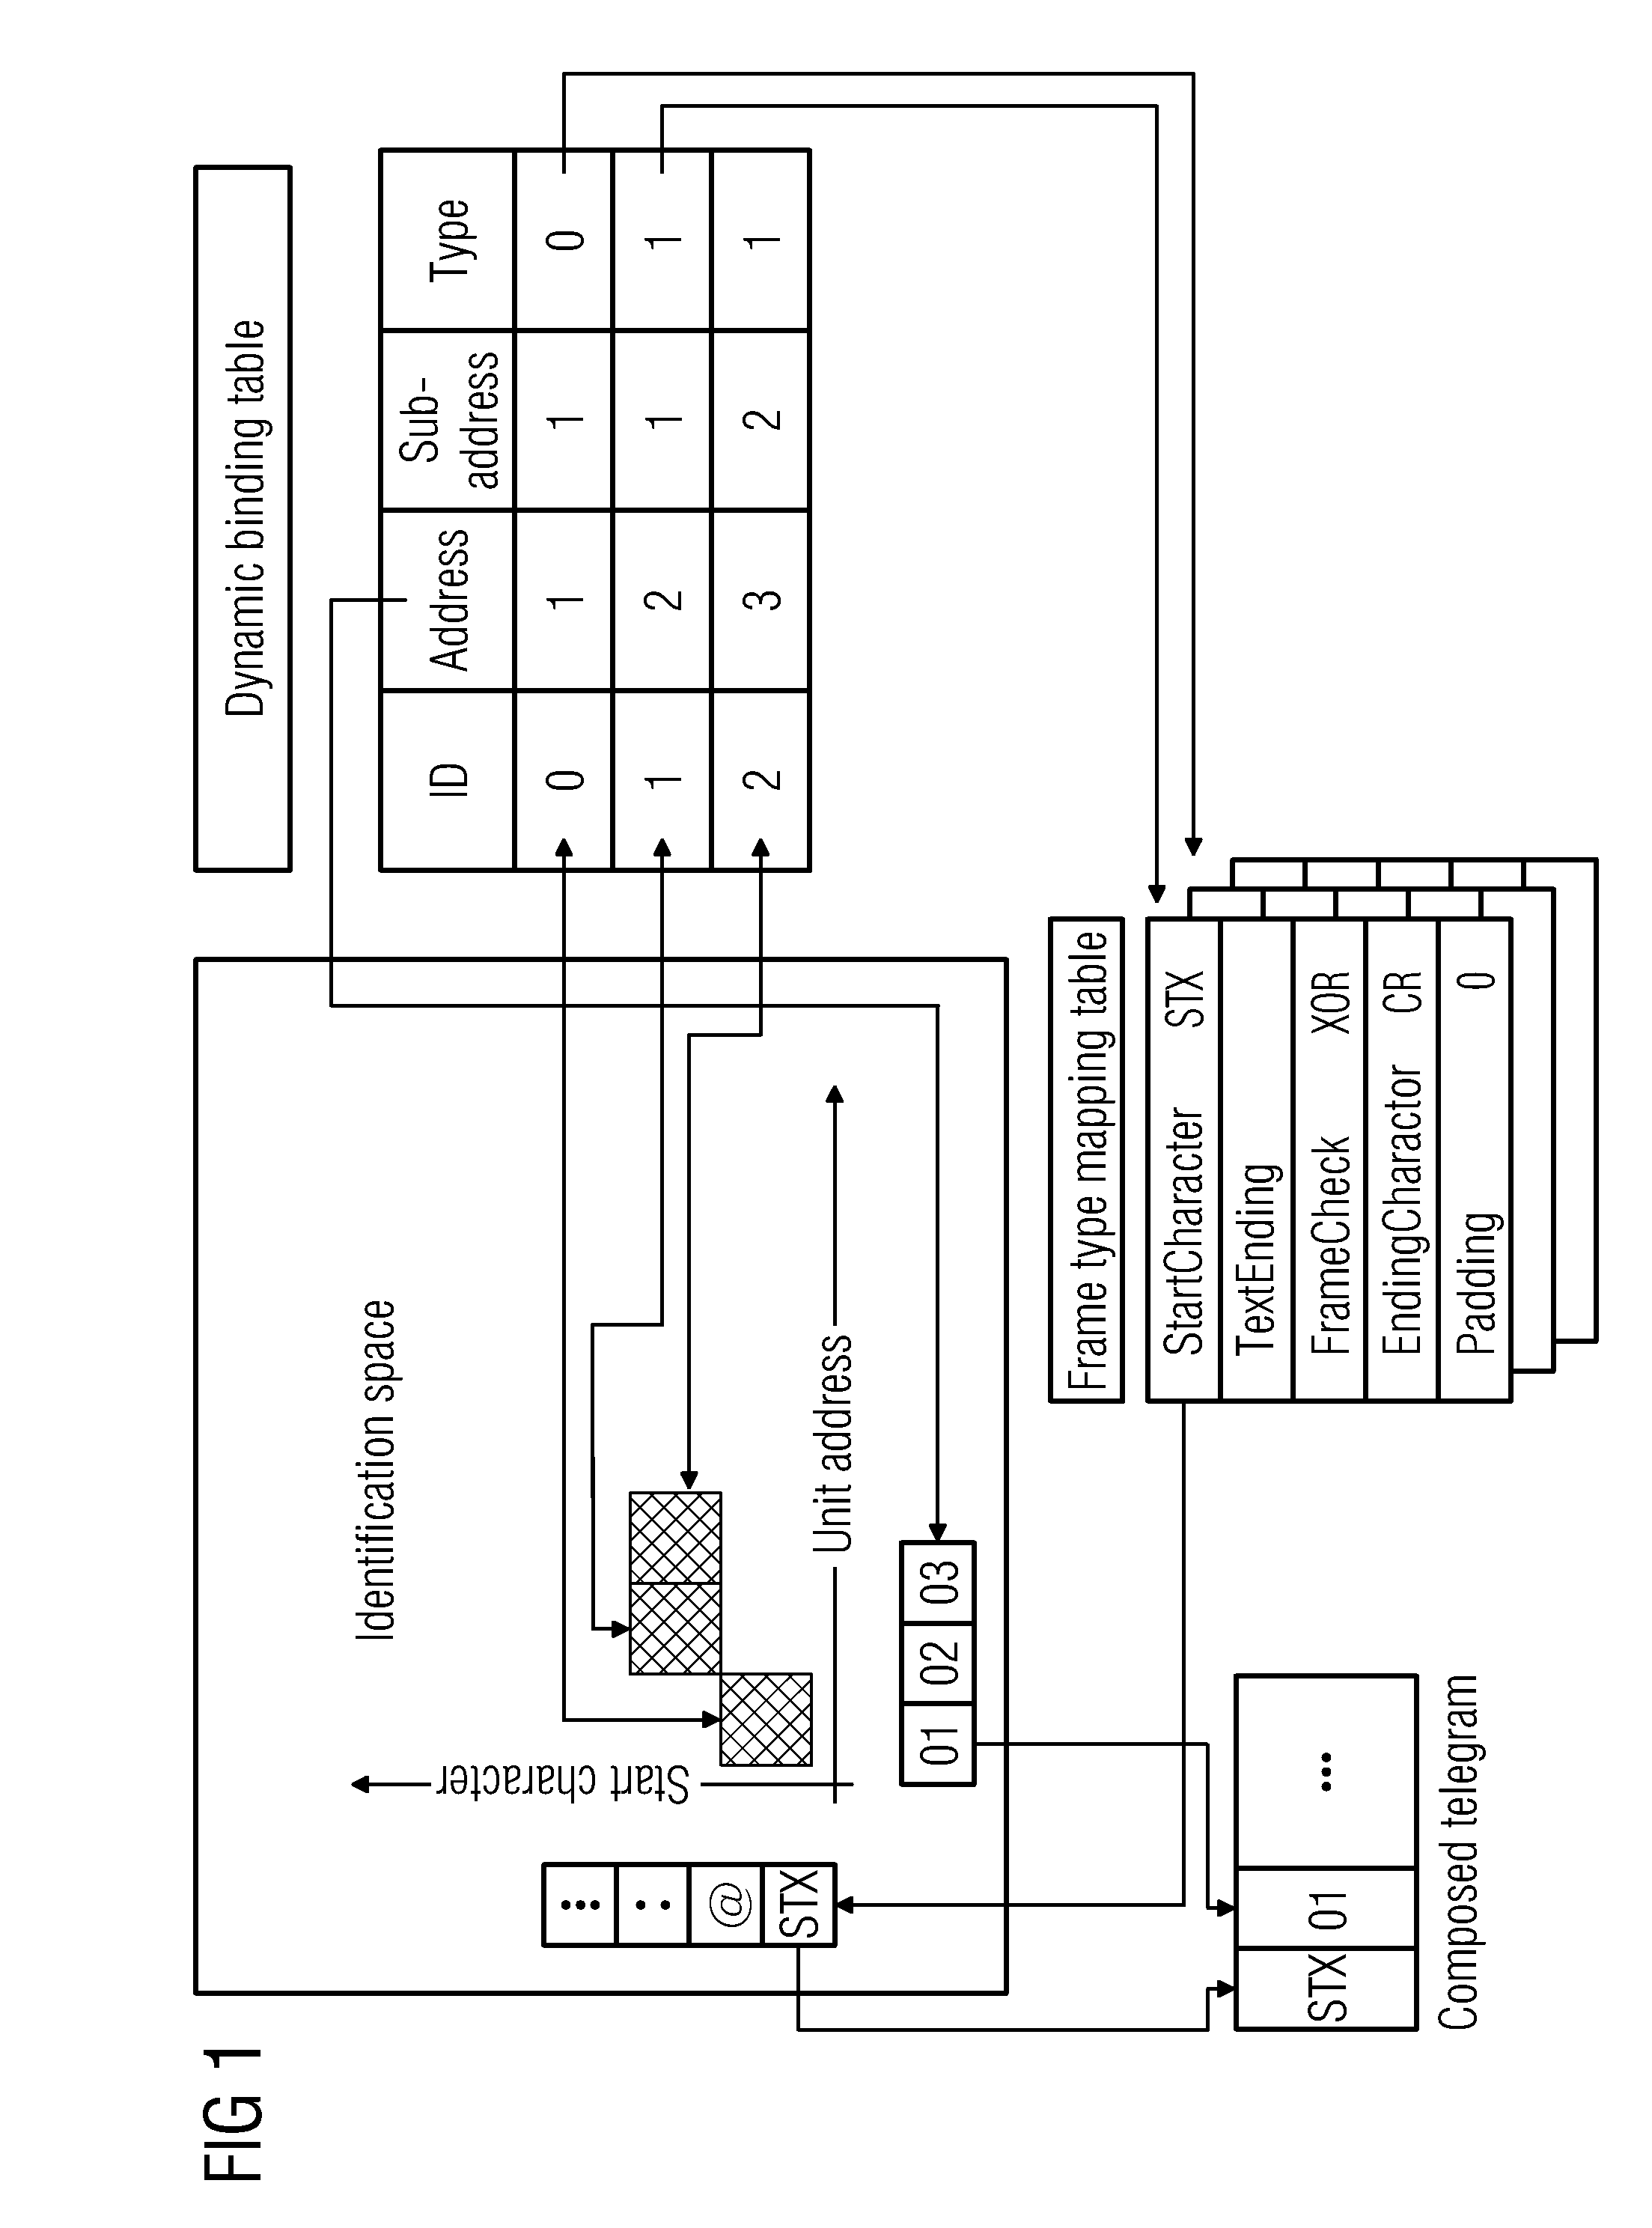 Communication method in a MRI system